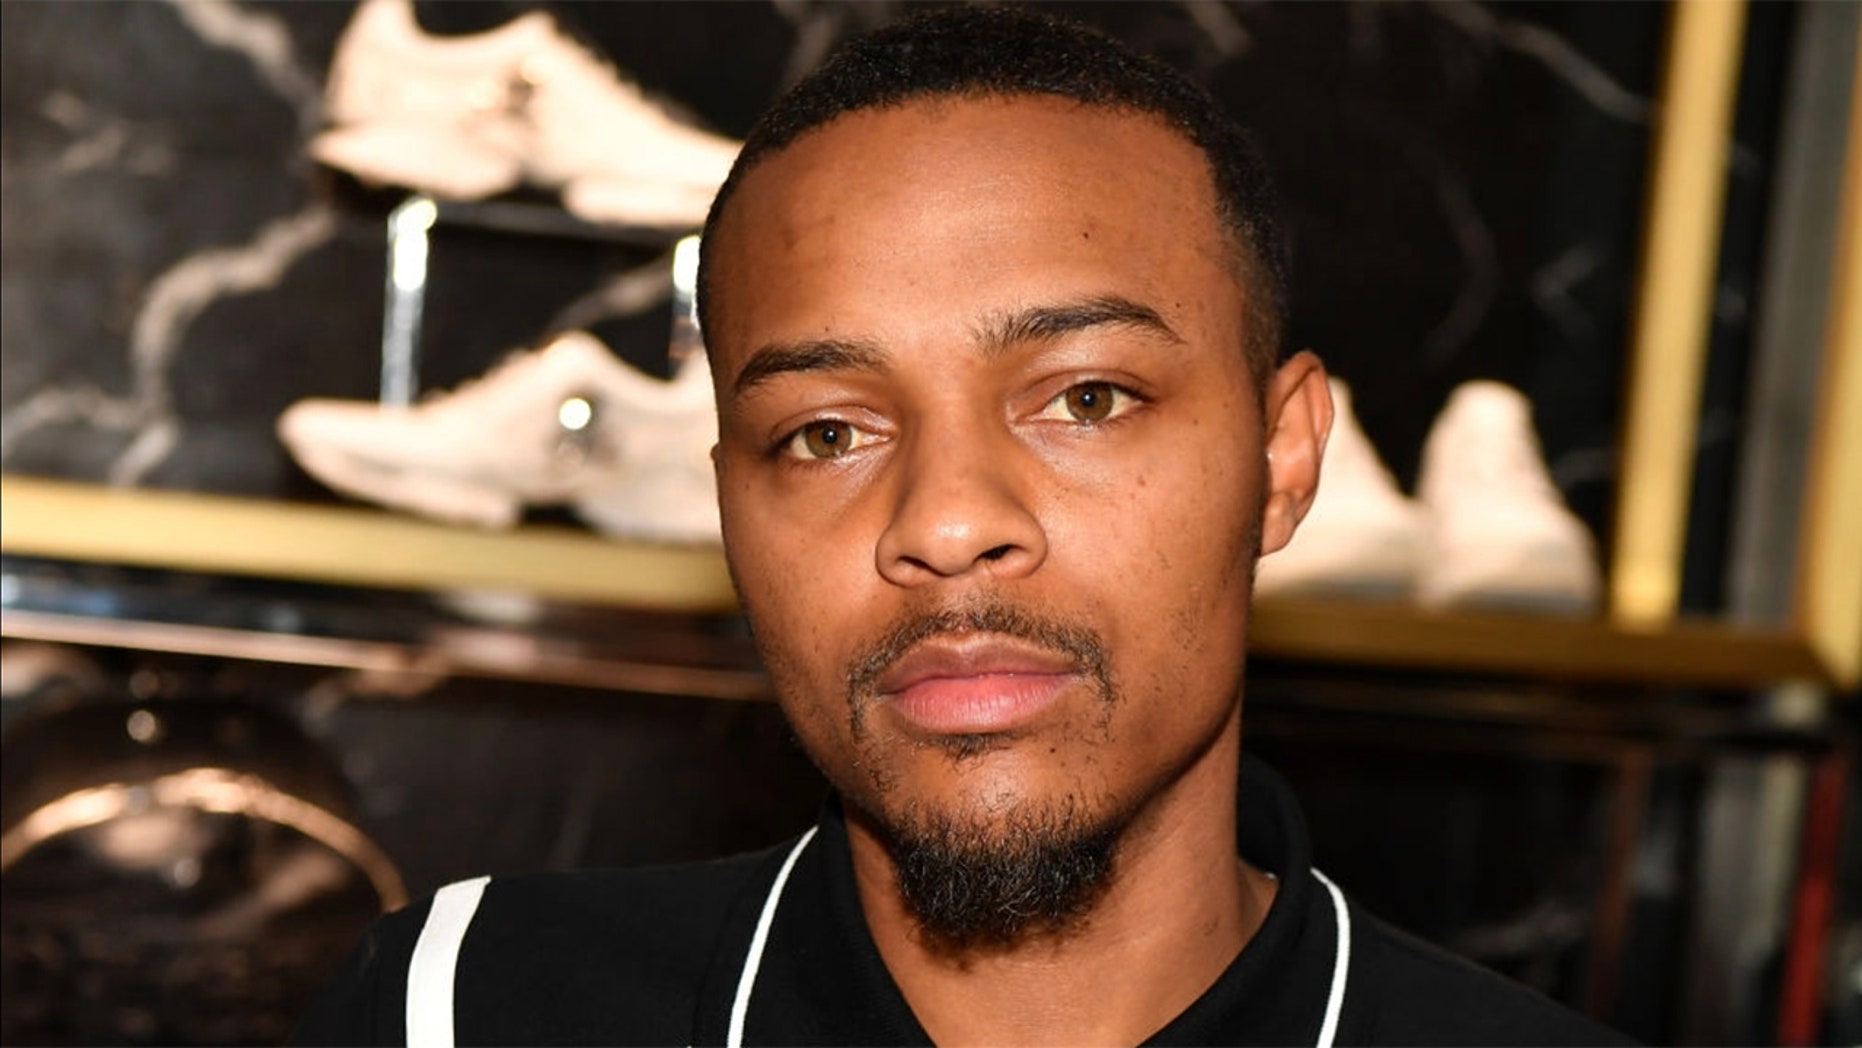 Rapper Bow Wow arrested in Atlanta for battery during Super Bowl weekend